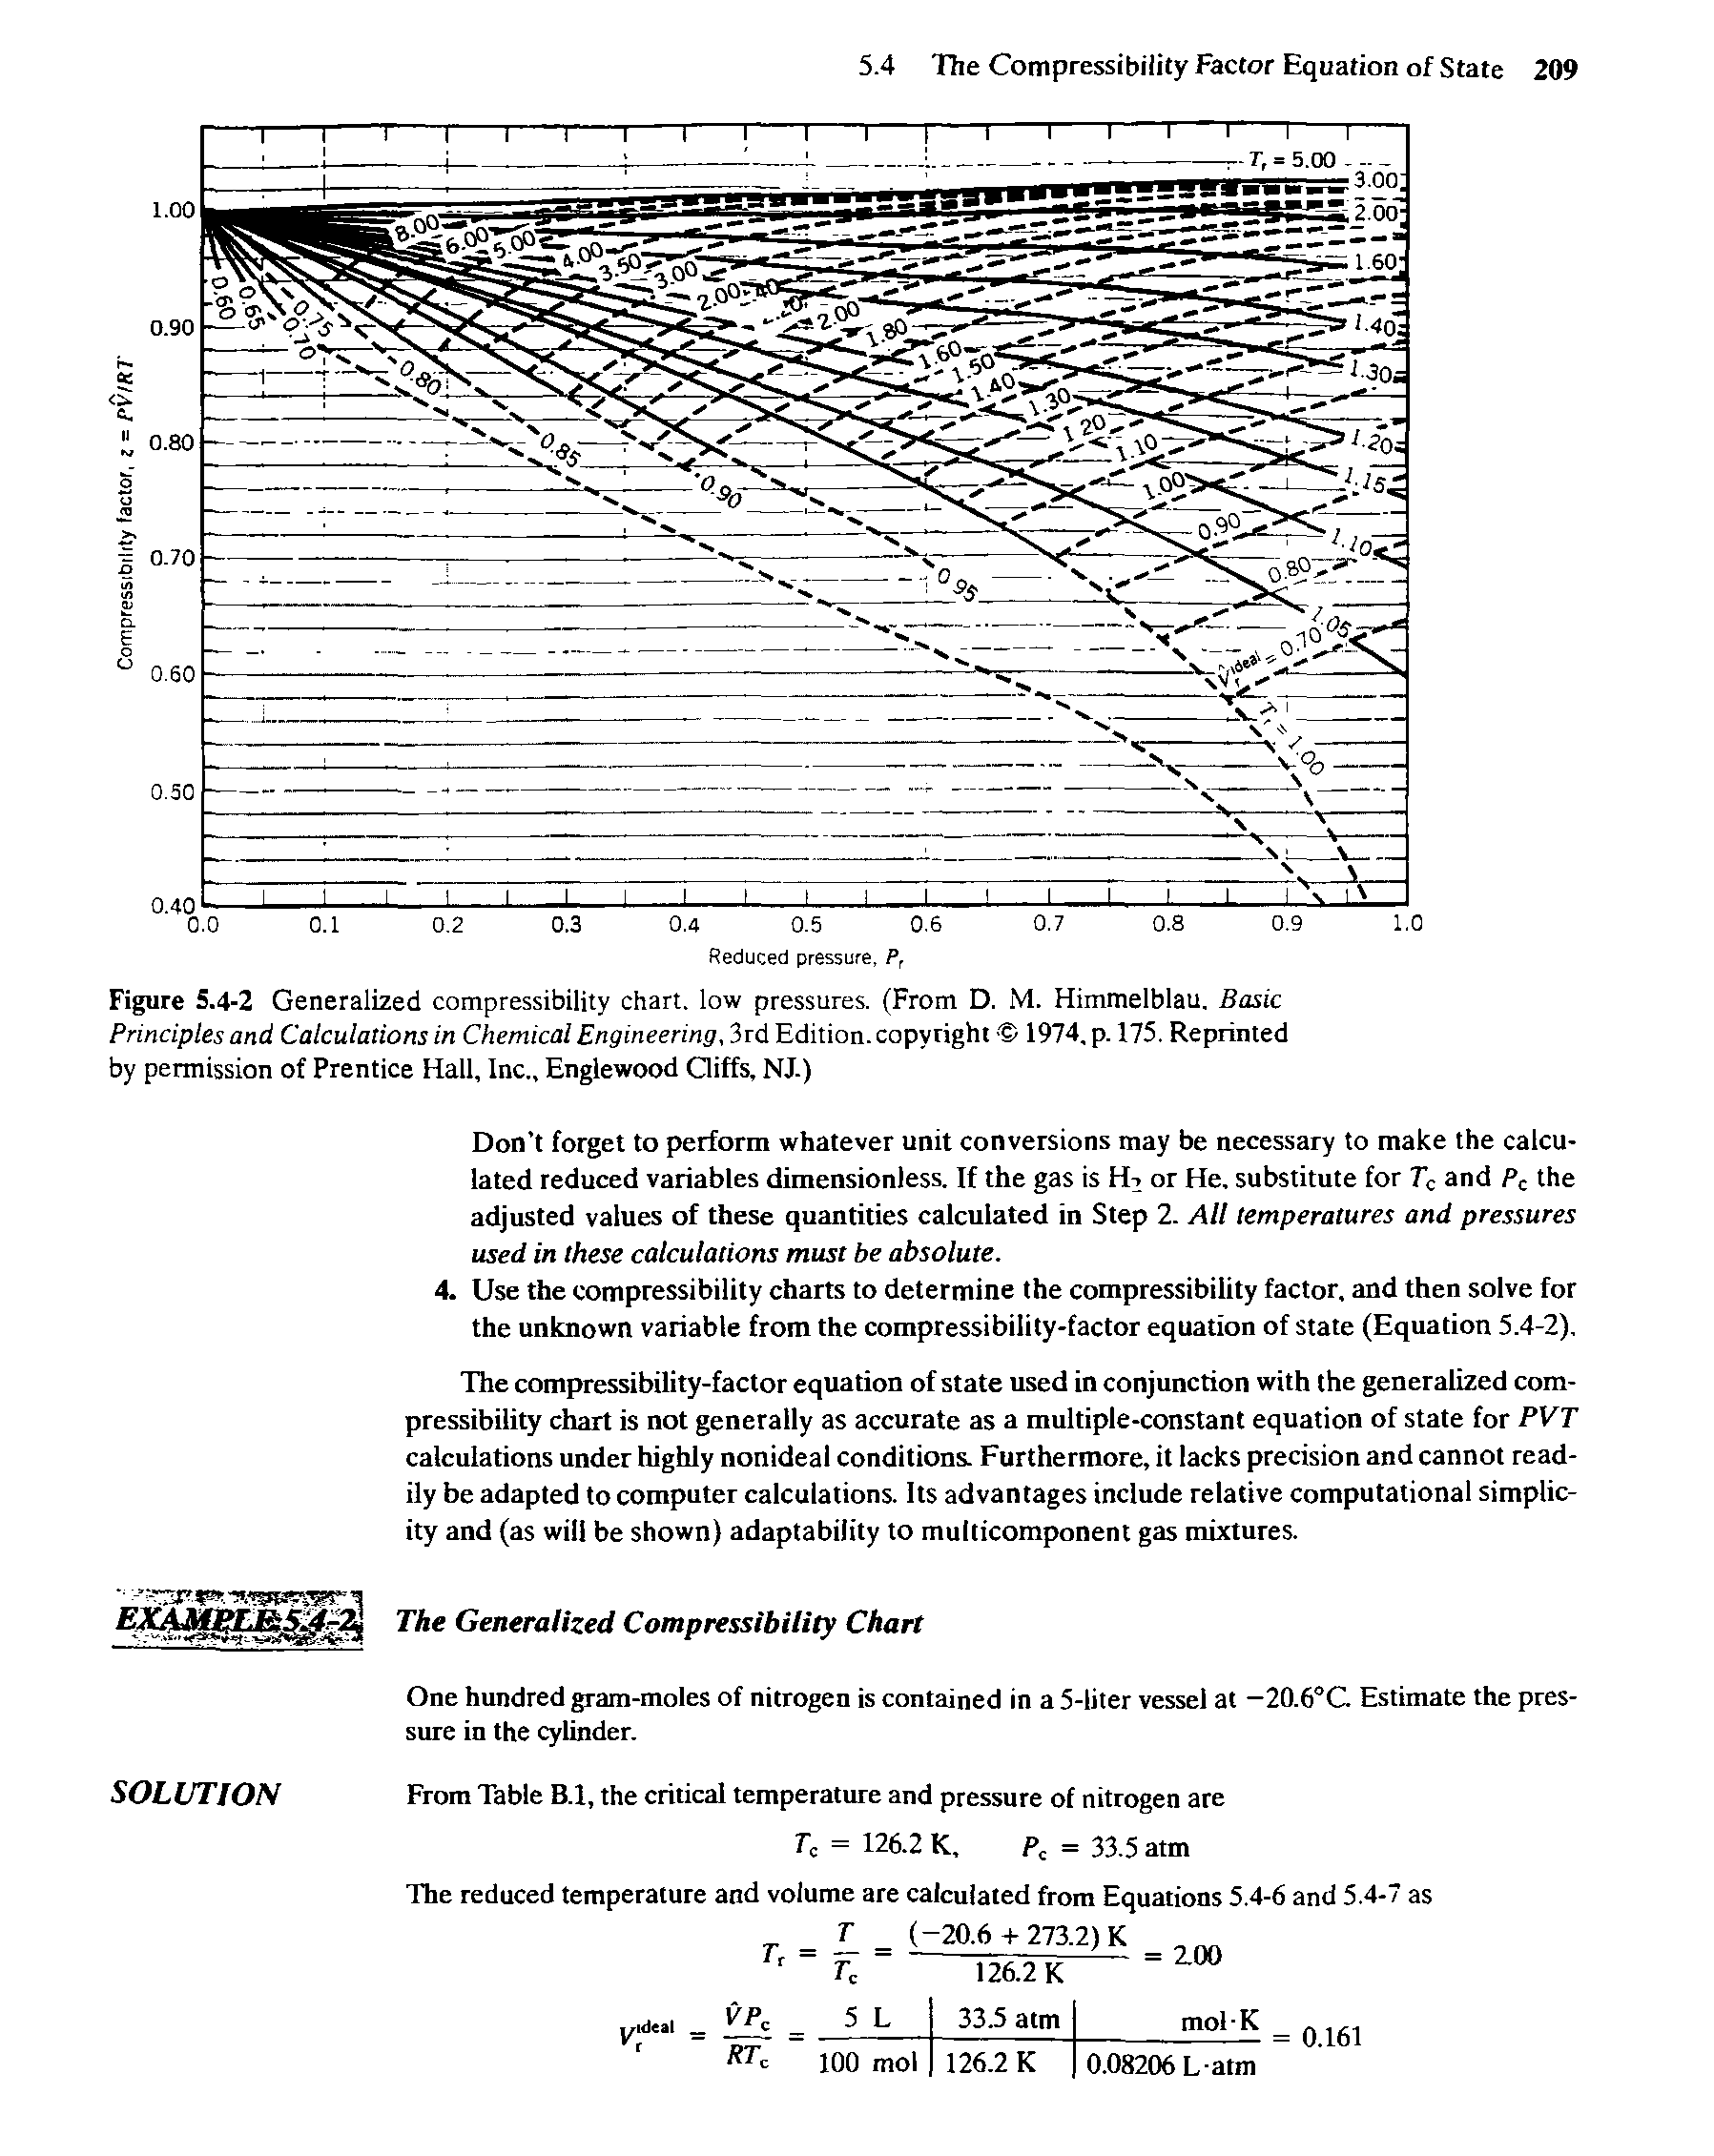 Figure 5.4-2 Generalized compressibility chart, low pressures. (From D. iM. Himmelblau. Basic Principles and Calculations in Chemical Engineering, 3rd Edition, copyright 1974, p. 175. Reprinted by permission of Prentice Hall, Inc., Englewood Qiffs, NX)...